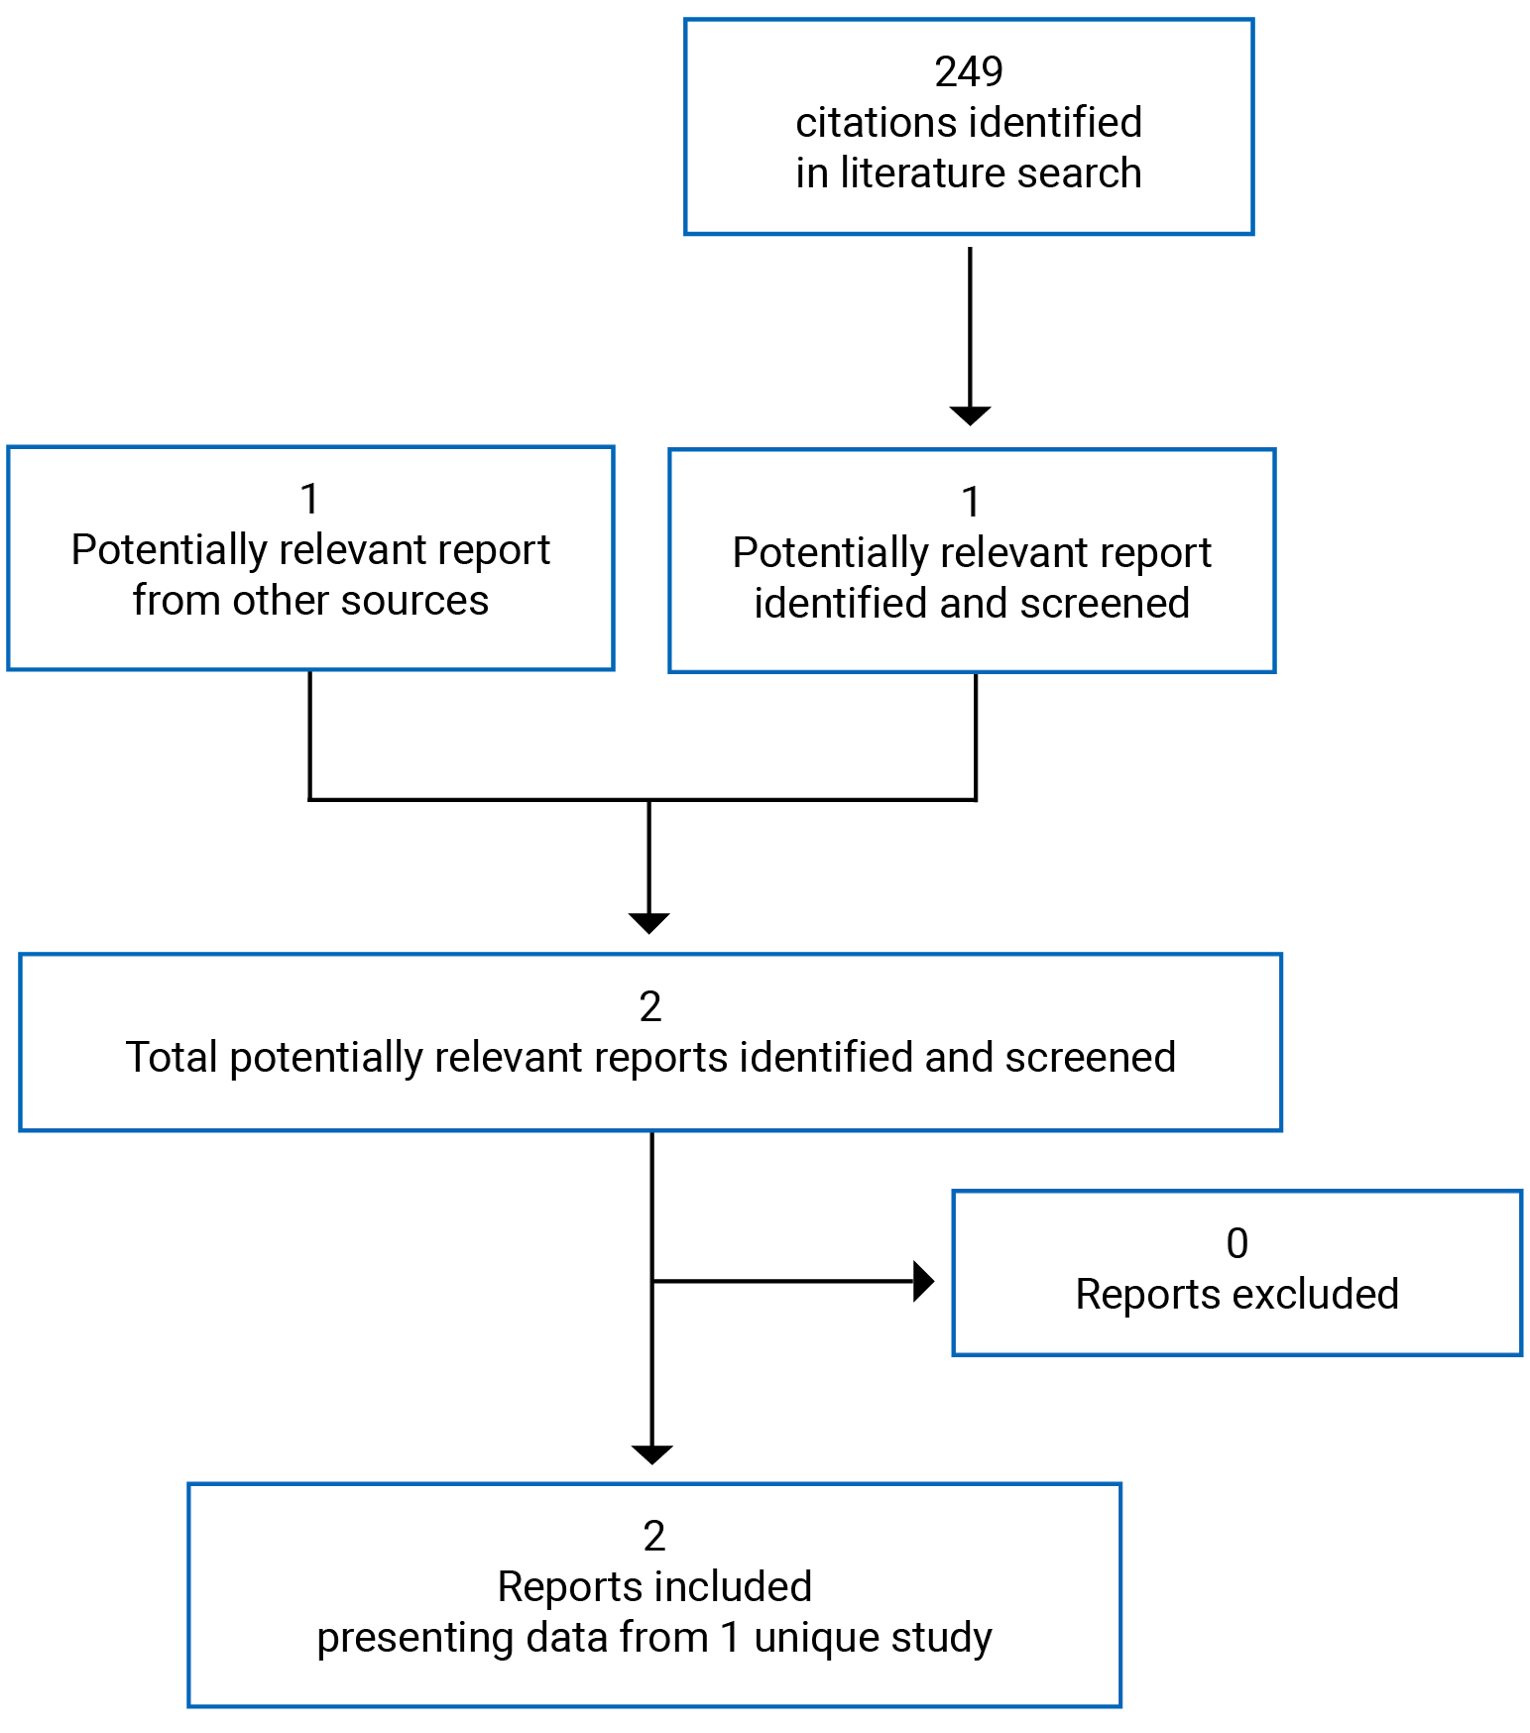 A total of 249 citations were identified from literature. Of those, 1 grey literature potentially relevant full-text report was retrieved for scrutiny; 1 potentially relevant report was also identified from other sources. Neither report was excluded after further examination so, in total, 2 reports about 1 study are included in the review.